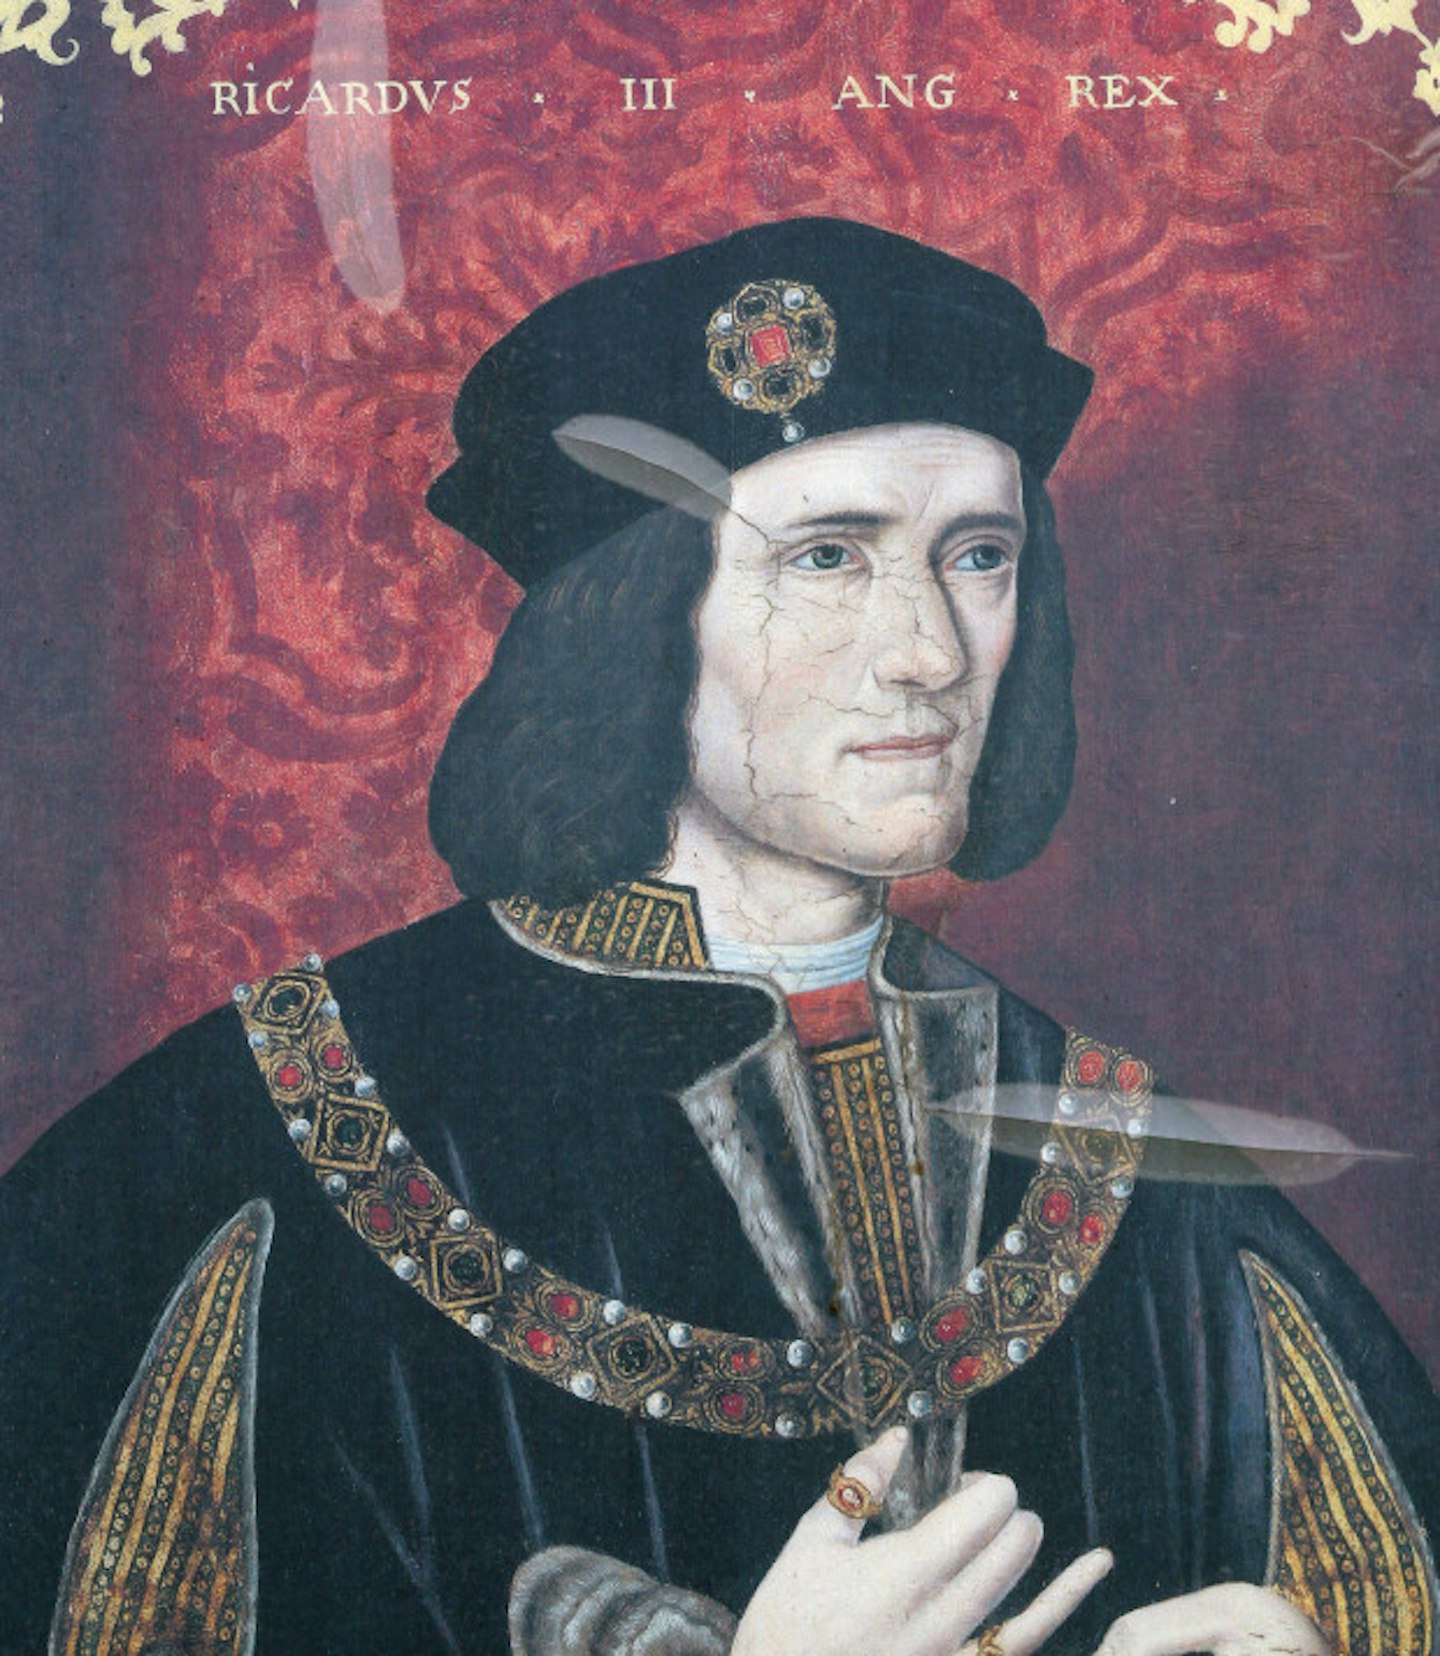 Richard III: not quite as fit as Benedict Cumberbatch